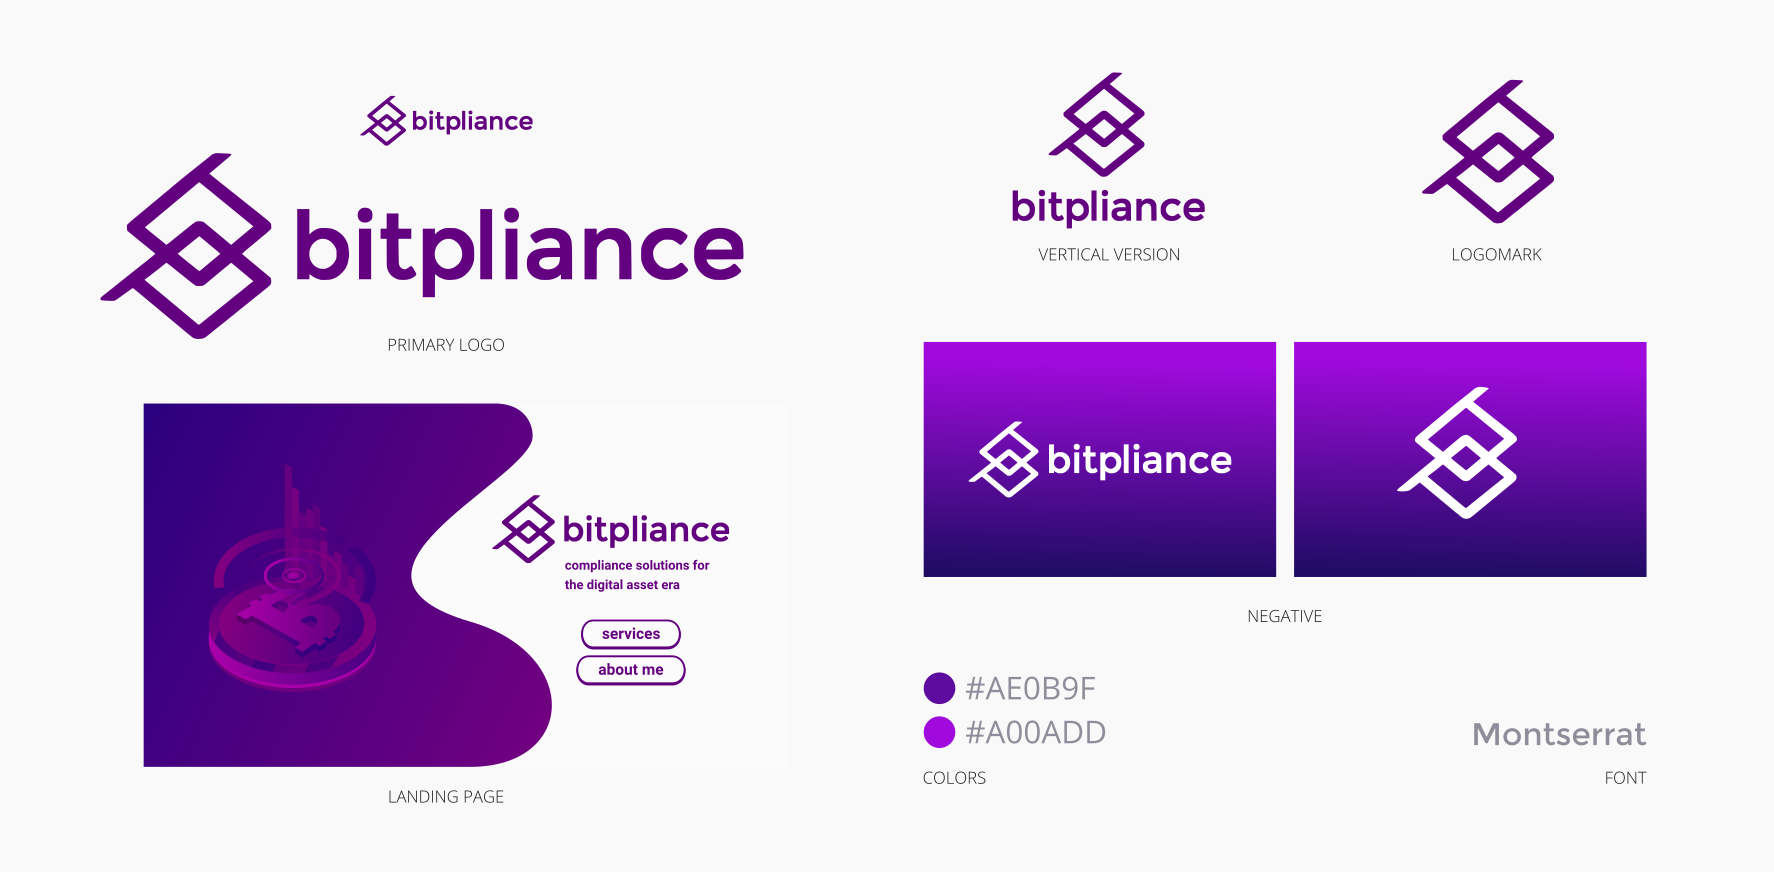 The logo and landing page design for Bitpliance